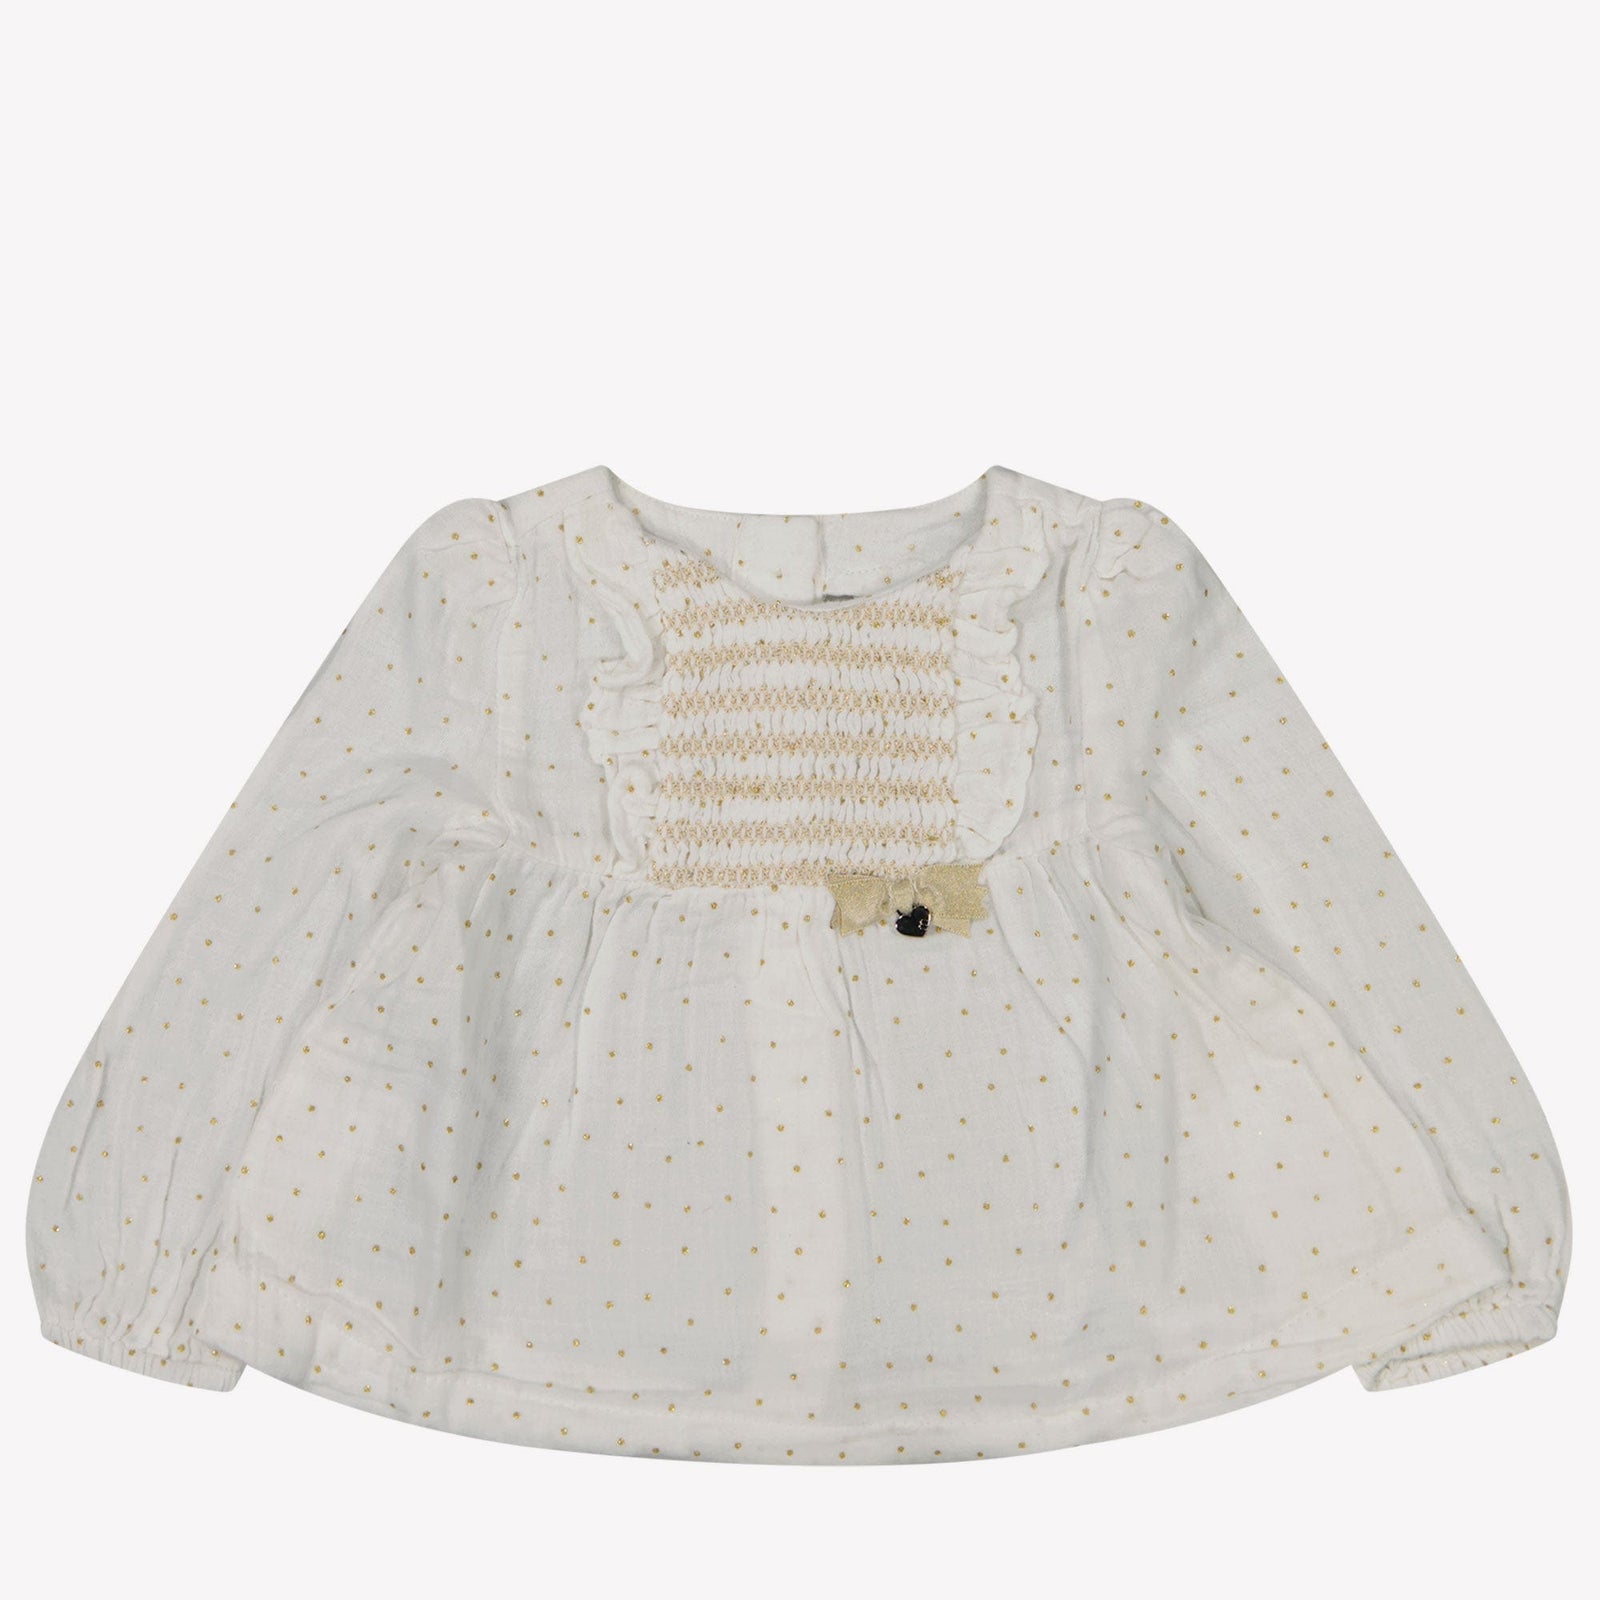 Mayoral Baby Meisjes Blouse Off White 6 mnd